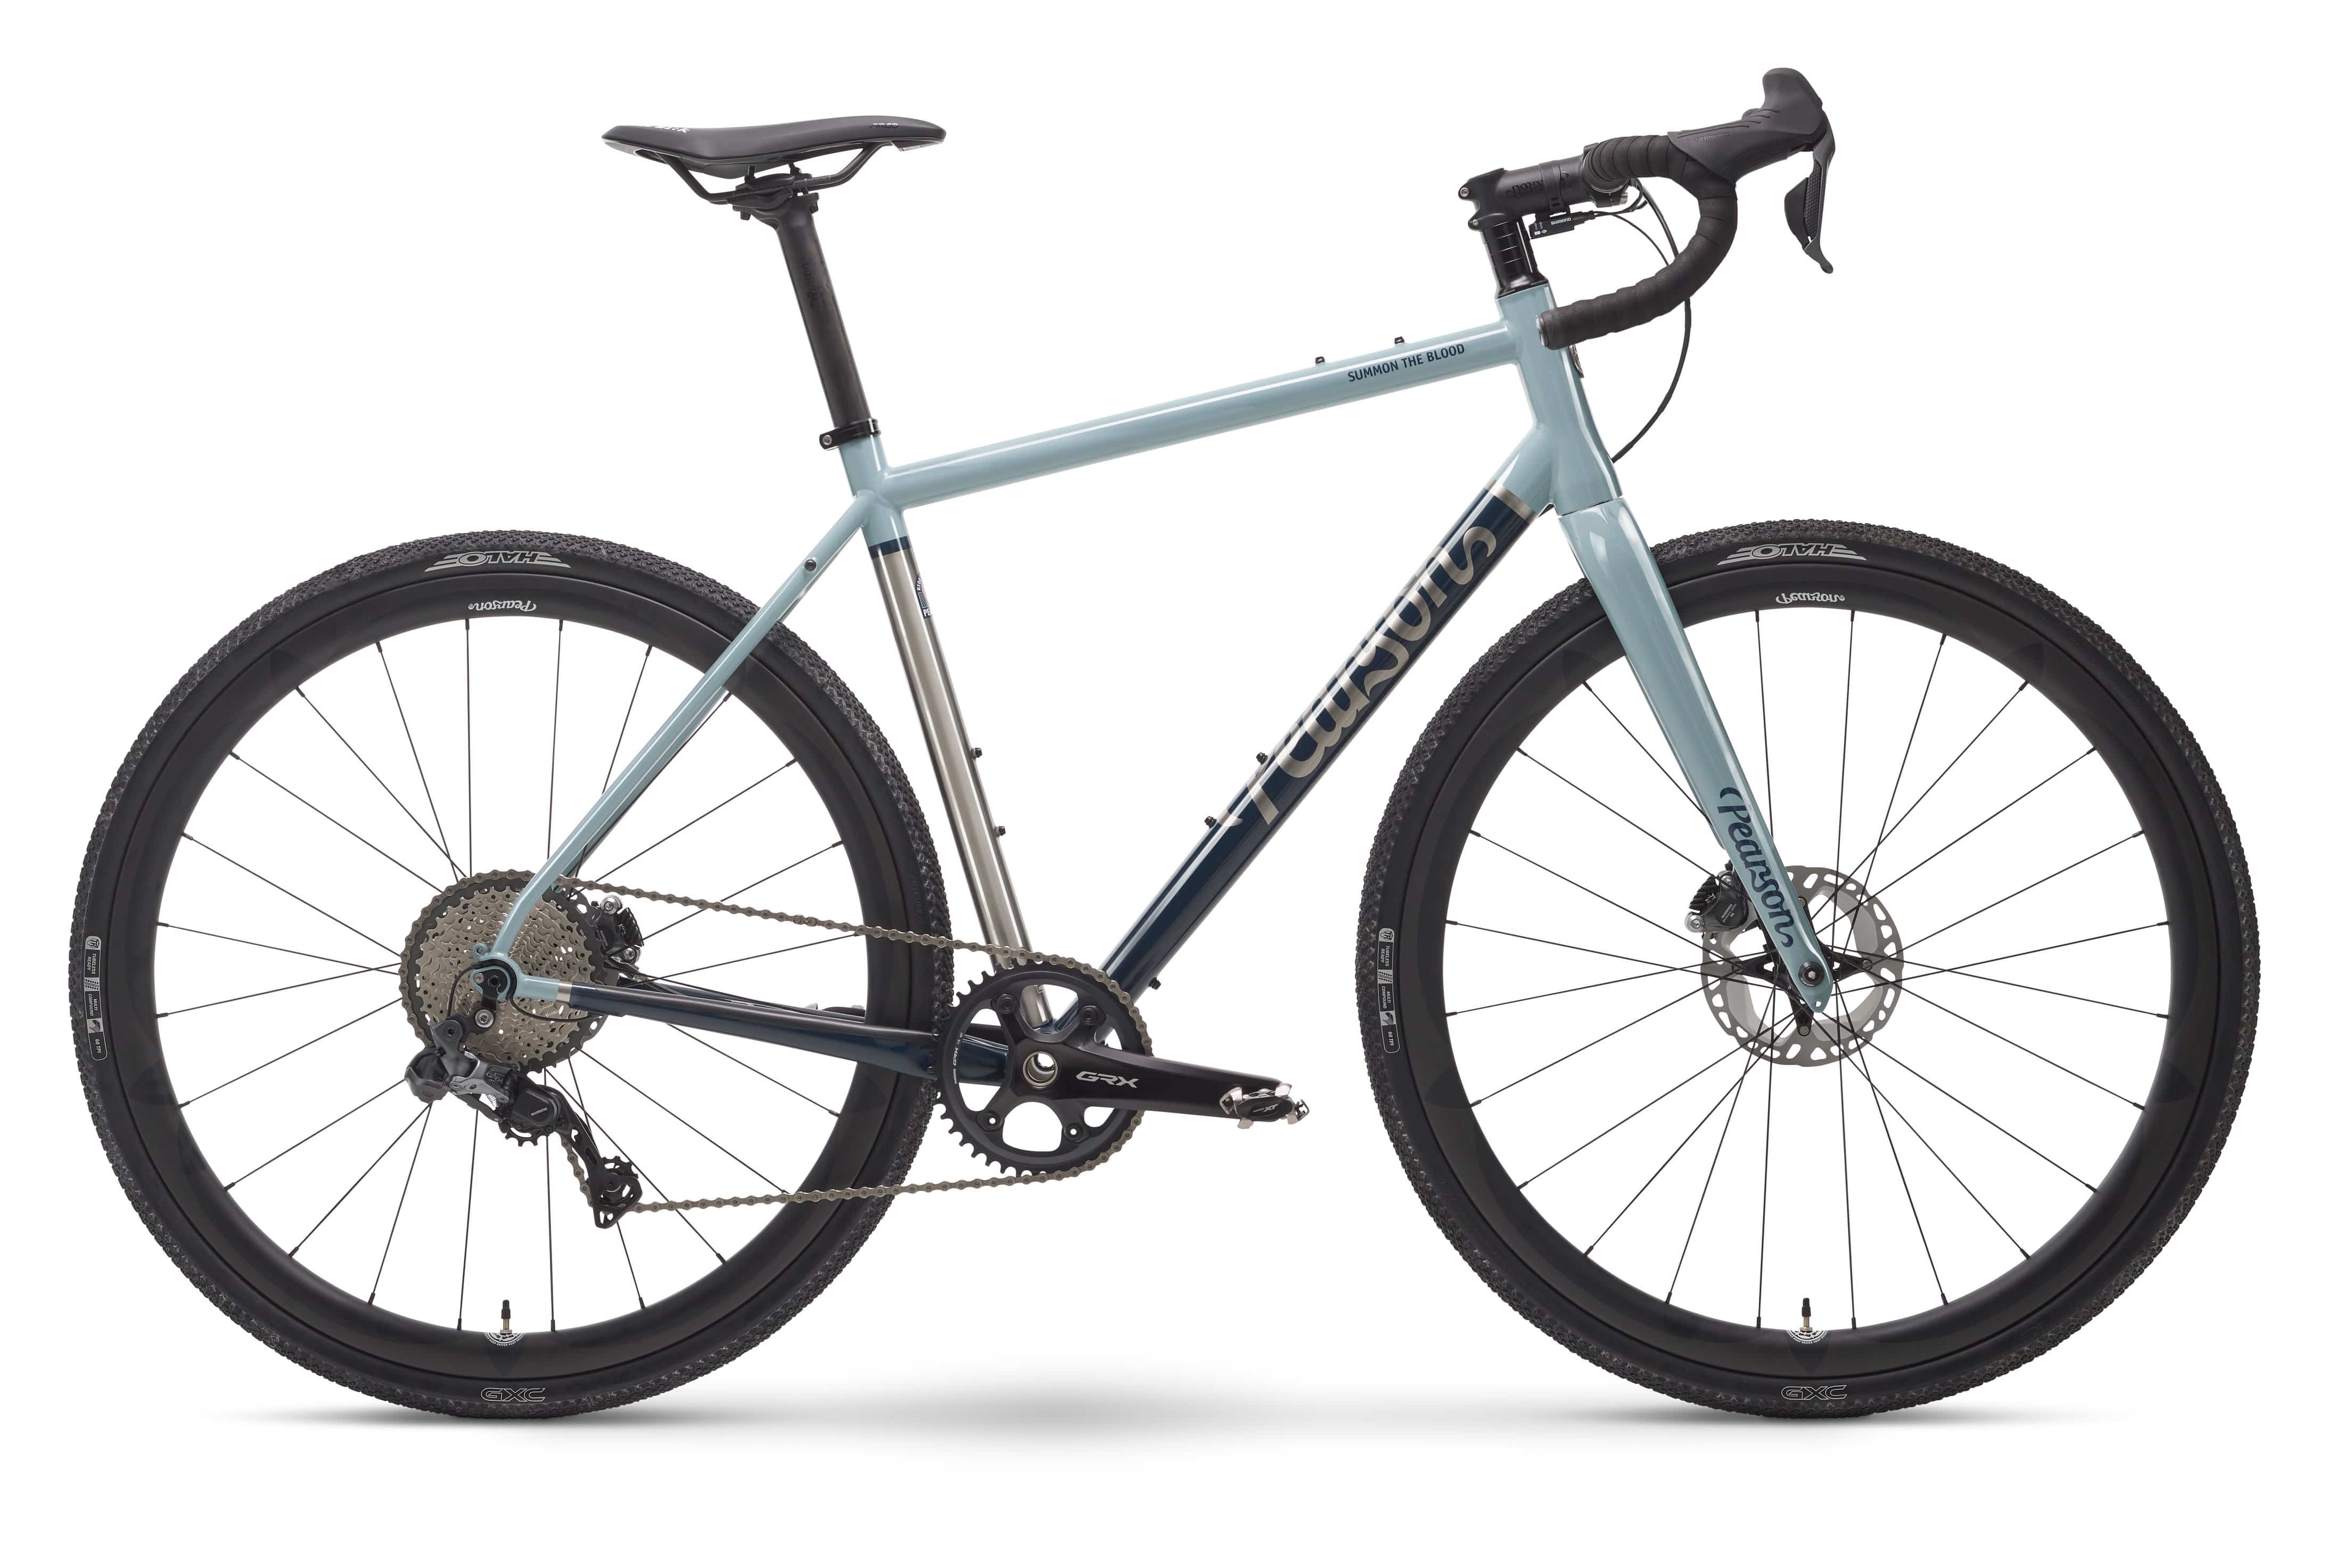 Pcs  Summon The Blood - Titanium Gravel Bike  X-small / Blu-tack / Grx815 ElectronicandHoopdriver Bump And Grind Carbon Wheels